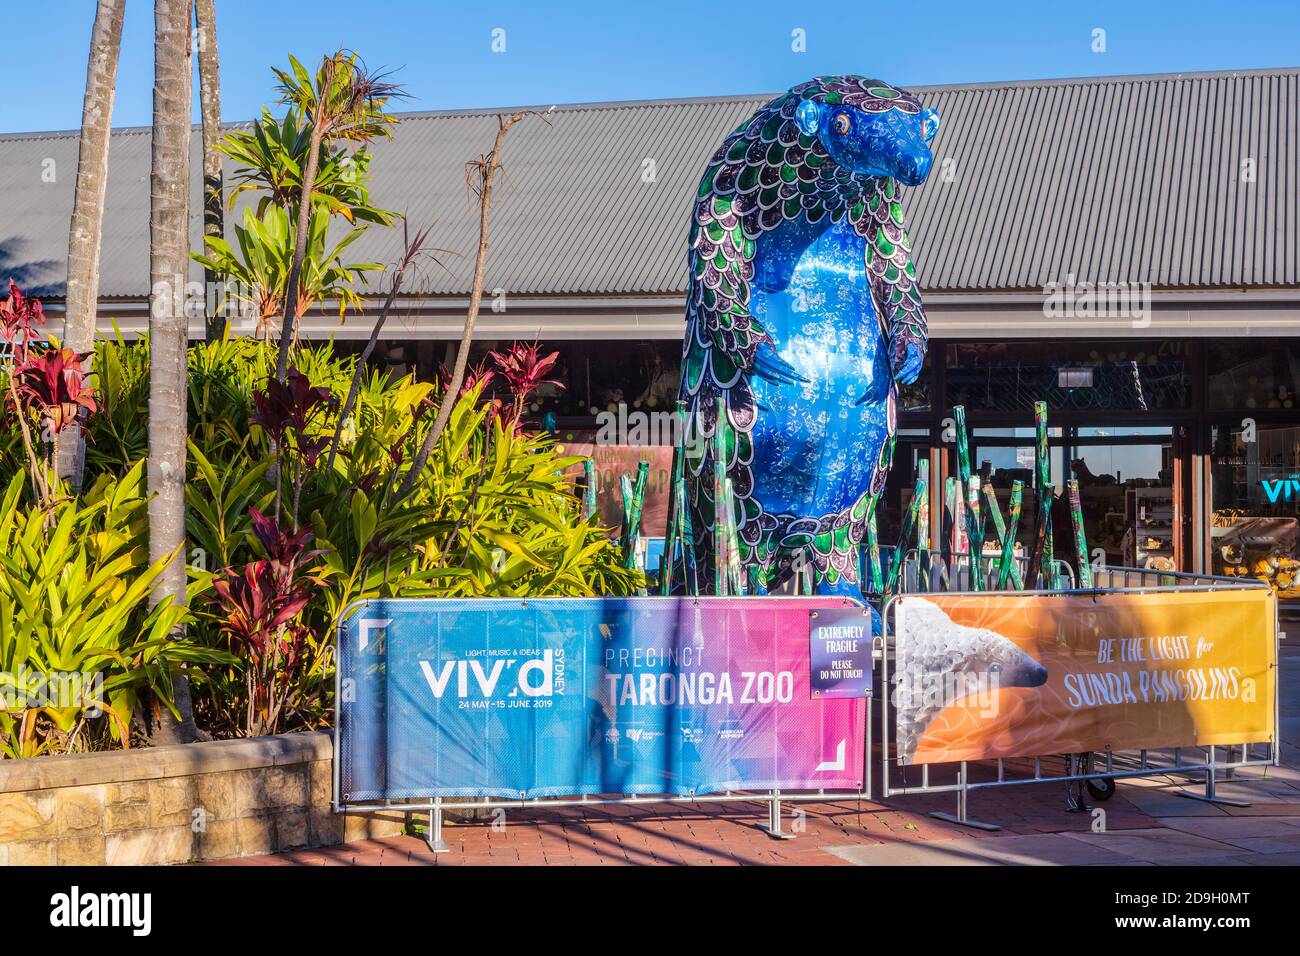 A colorful model of a pangolin (scaly anteater) on display at Taronga Zoo, Sydney, Australia, during the annual 'Vivid Sydney' festival Stock Photo